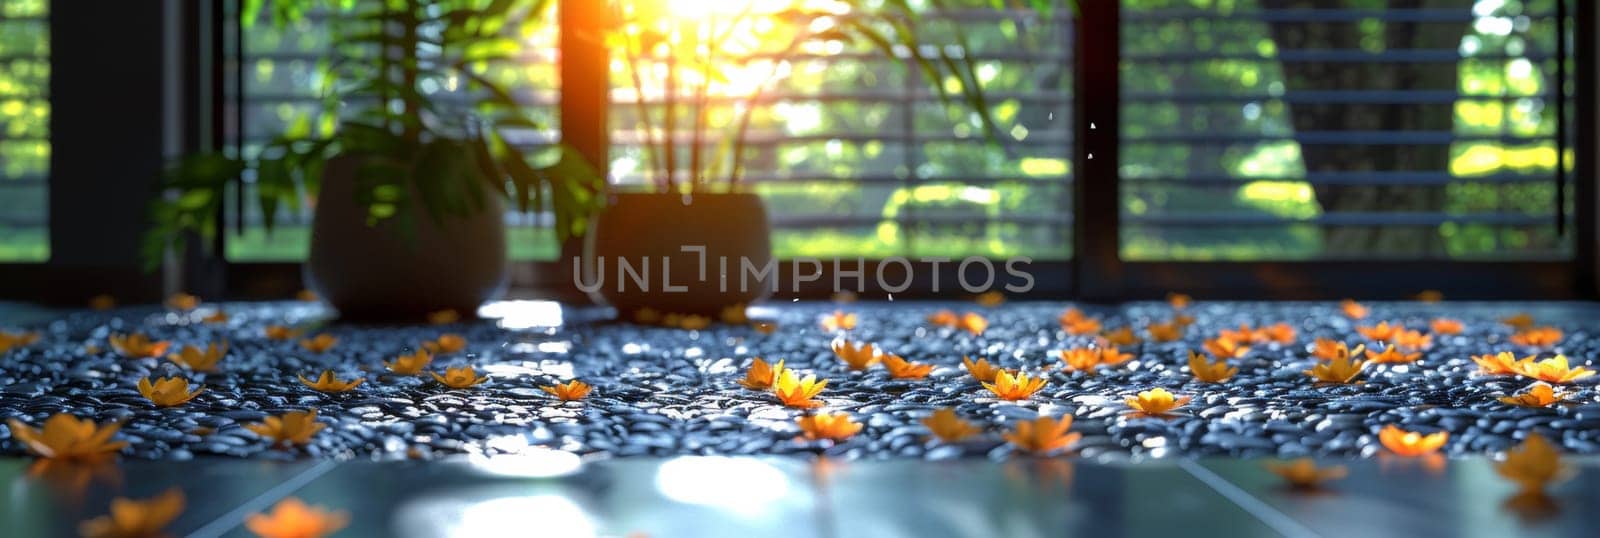 A potted plants on a floor with orange flowers and leaves